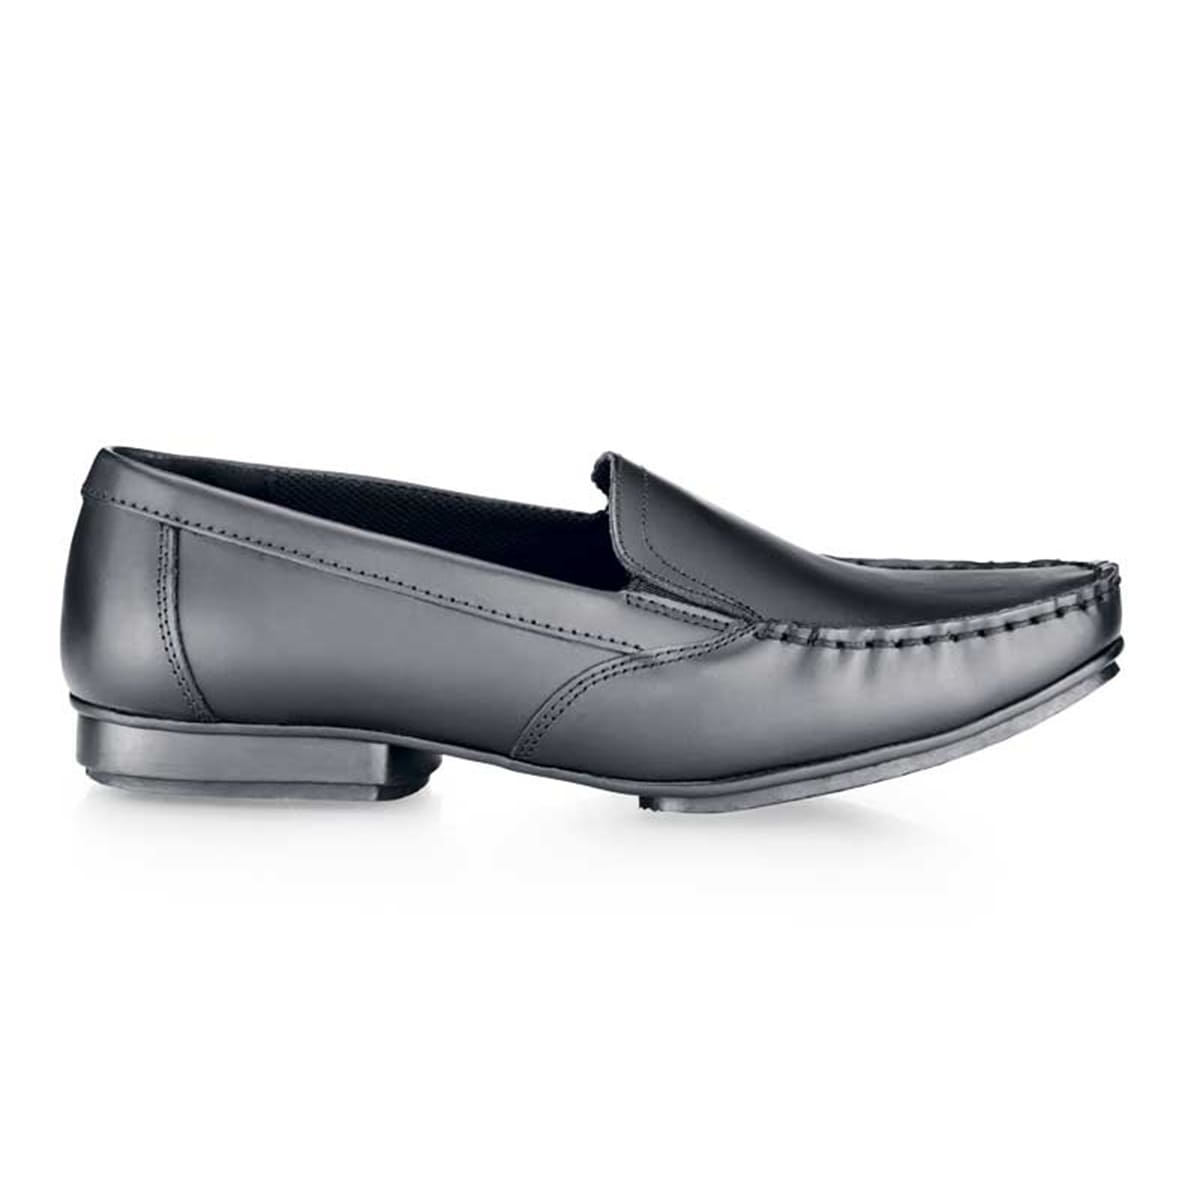 The Jenni from Shoes For Crews is a slip-on dress shoe, slip-resistant and designed to provide comfort throughout the working day, seen from the right.